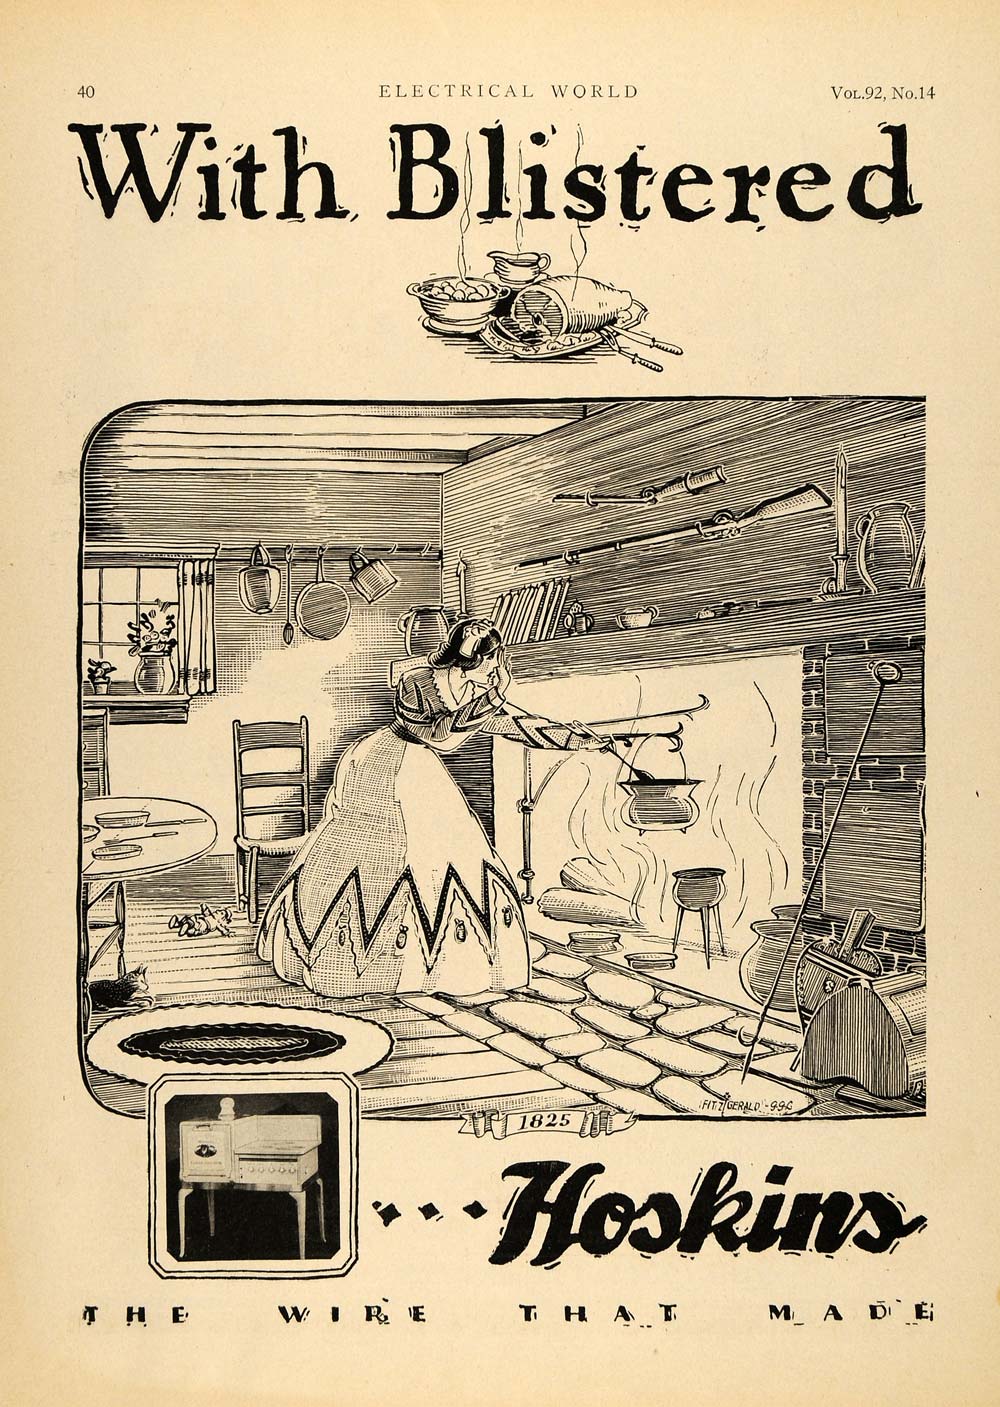 1928 Ad Hoskins Manufacturing Co. Hotpoint Fireplace - ORIGINAL ADVERTISING ELC1